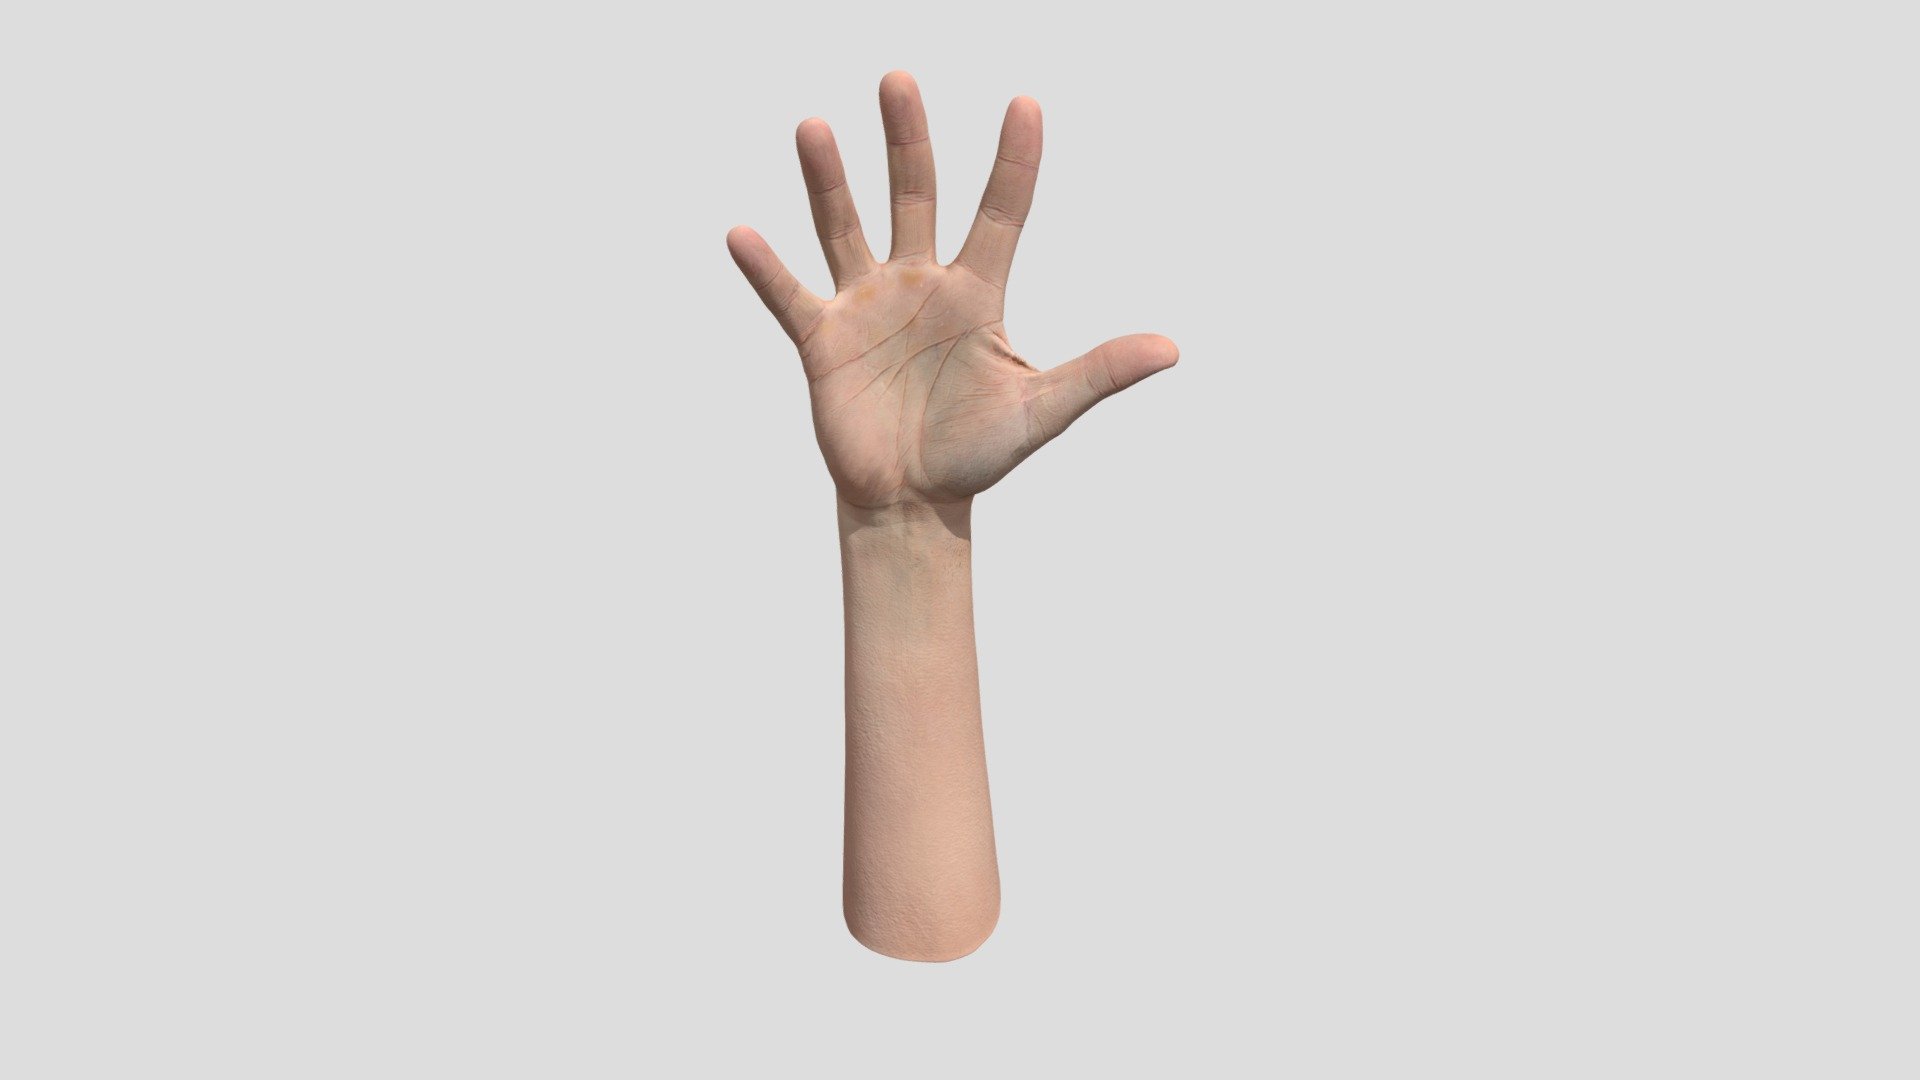 We would like to introduce you to one of the many retopologized hands that offers precise retopology.This hand is perfect for anyone looking for a realistic and aesthetically crafted model for their projects. Find out how this collection can enrich your creative work and give it the visual punch it needs!

Ethnicity: White
Gender: Male
Age: 45
Height: 183 cm
Weight: 93 kg

NOTE: Retopologized scan with postproduction.

Technical Specifications:

1 x OBJ. File / 78 000 polys
2 x 8K PNG Texture - Diffuse, Normal

3Dsk provides all you need from virtual casting studio. Model casting, neutral &amp; morph expression scans, full body scans, accessories and cloth scans, 3D postproduction, photoshooting of full body, portrait, hair, eyes and skin &amp; other on demand services 3d model